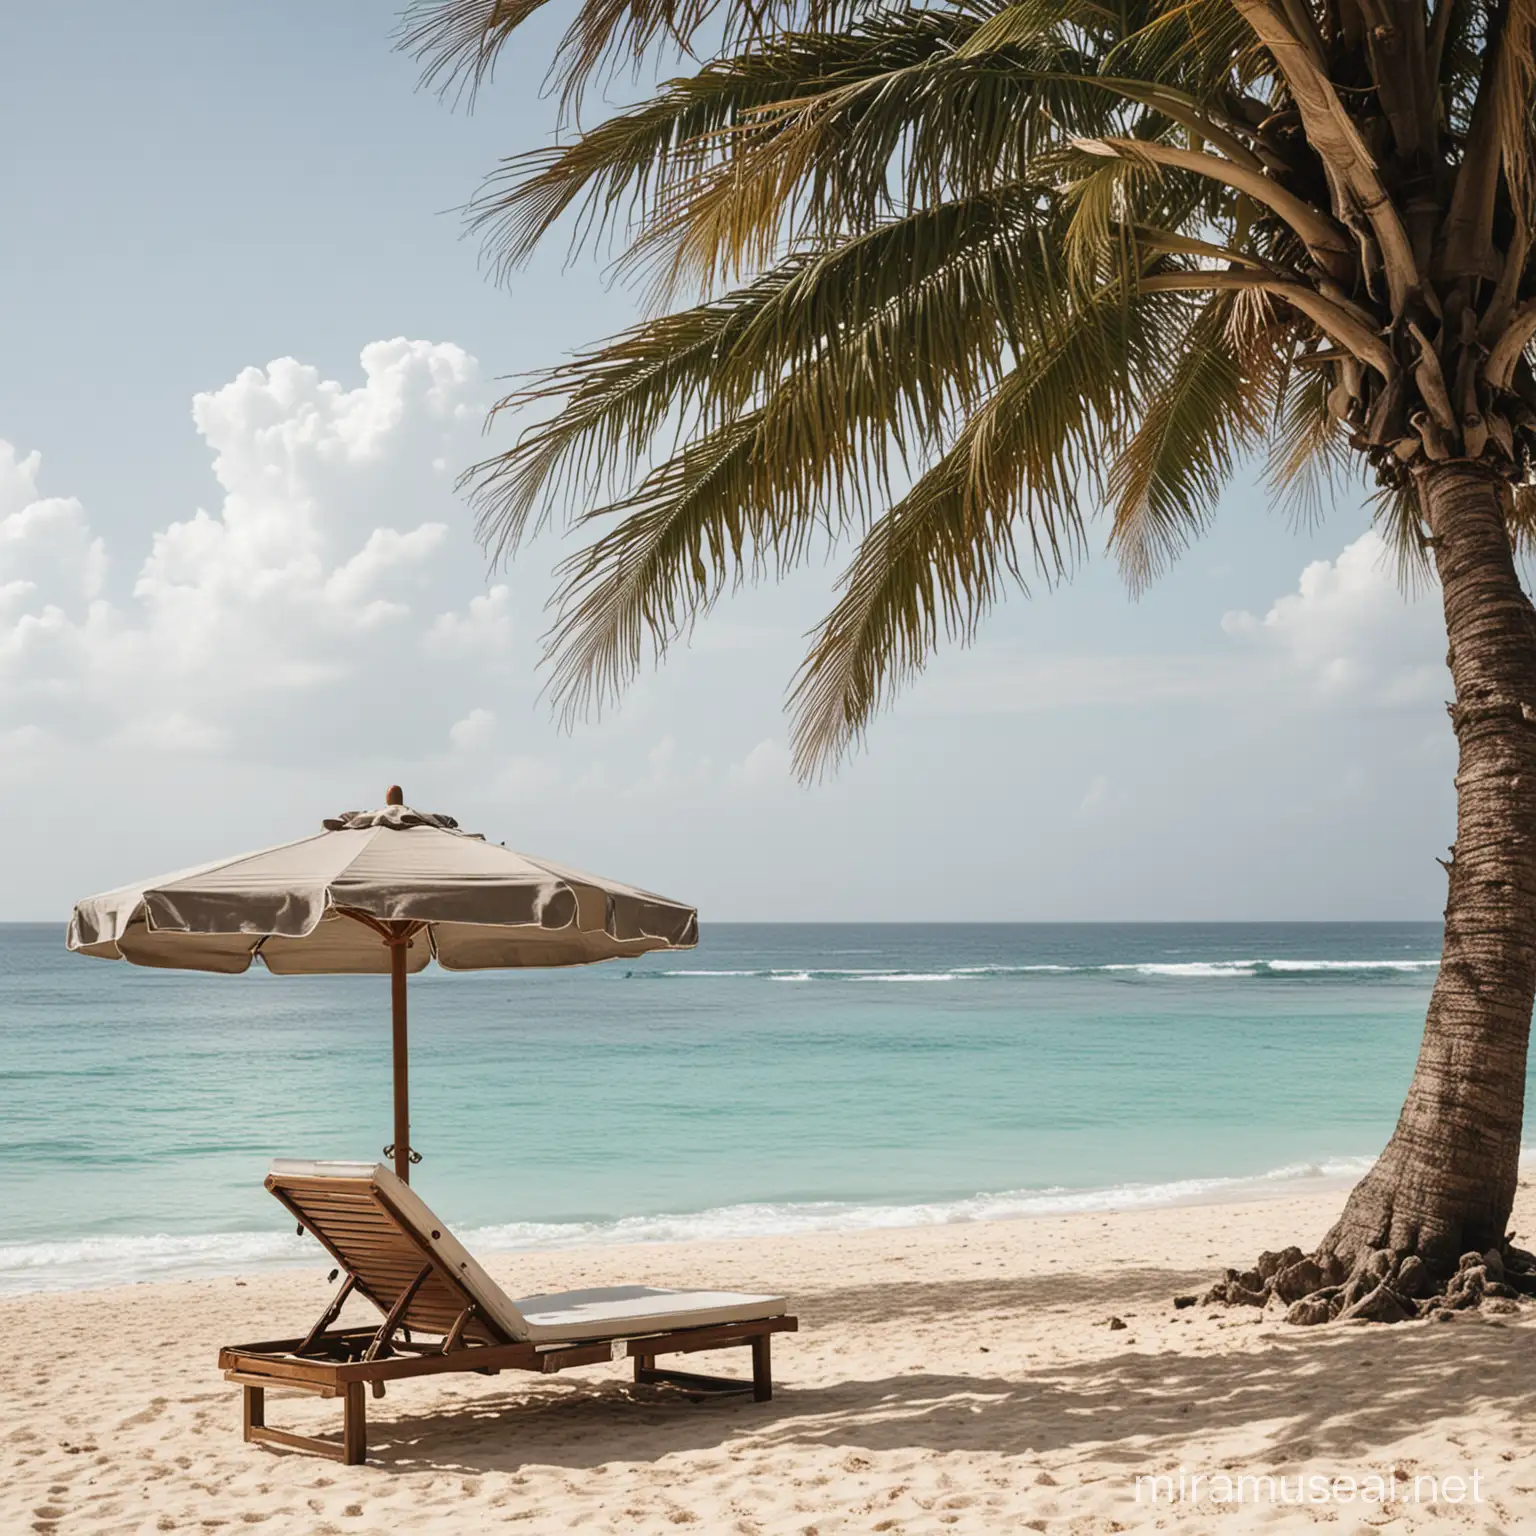 Relaxing Beach Scene with Umbrella and Chaise Lounge in Jamaica